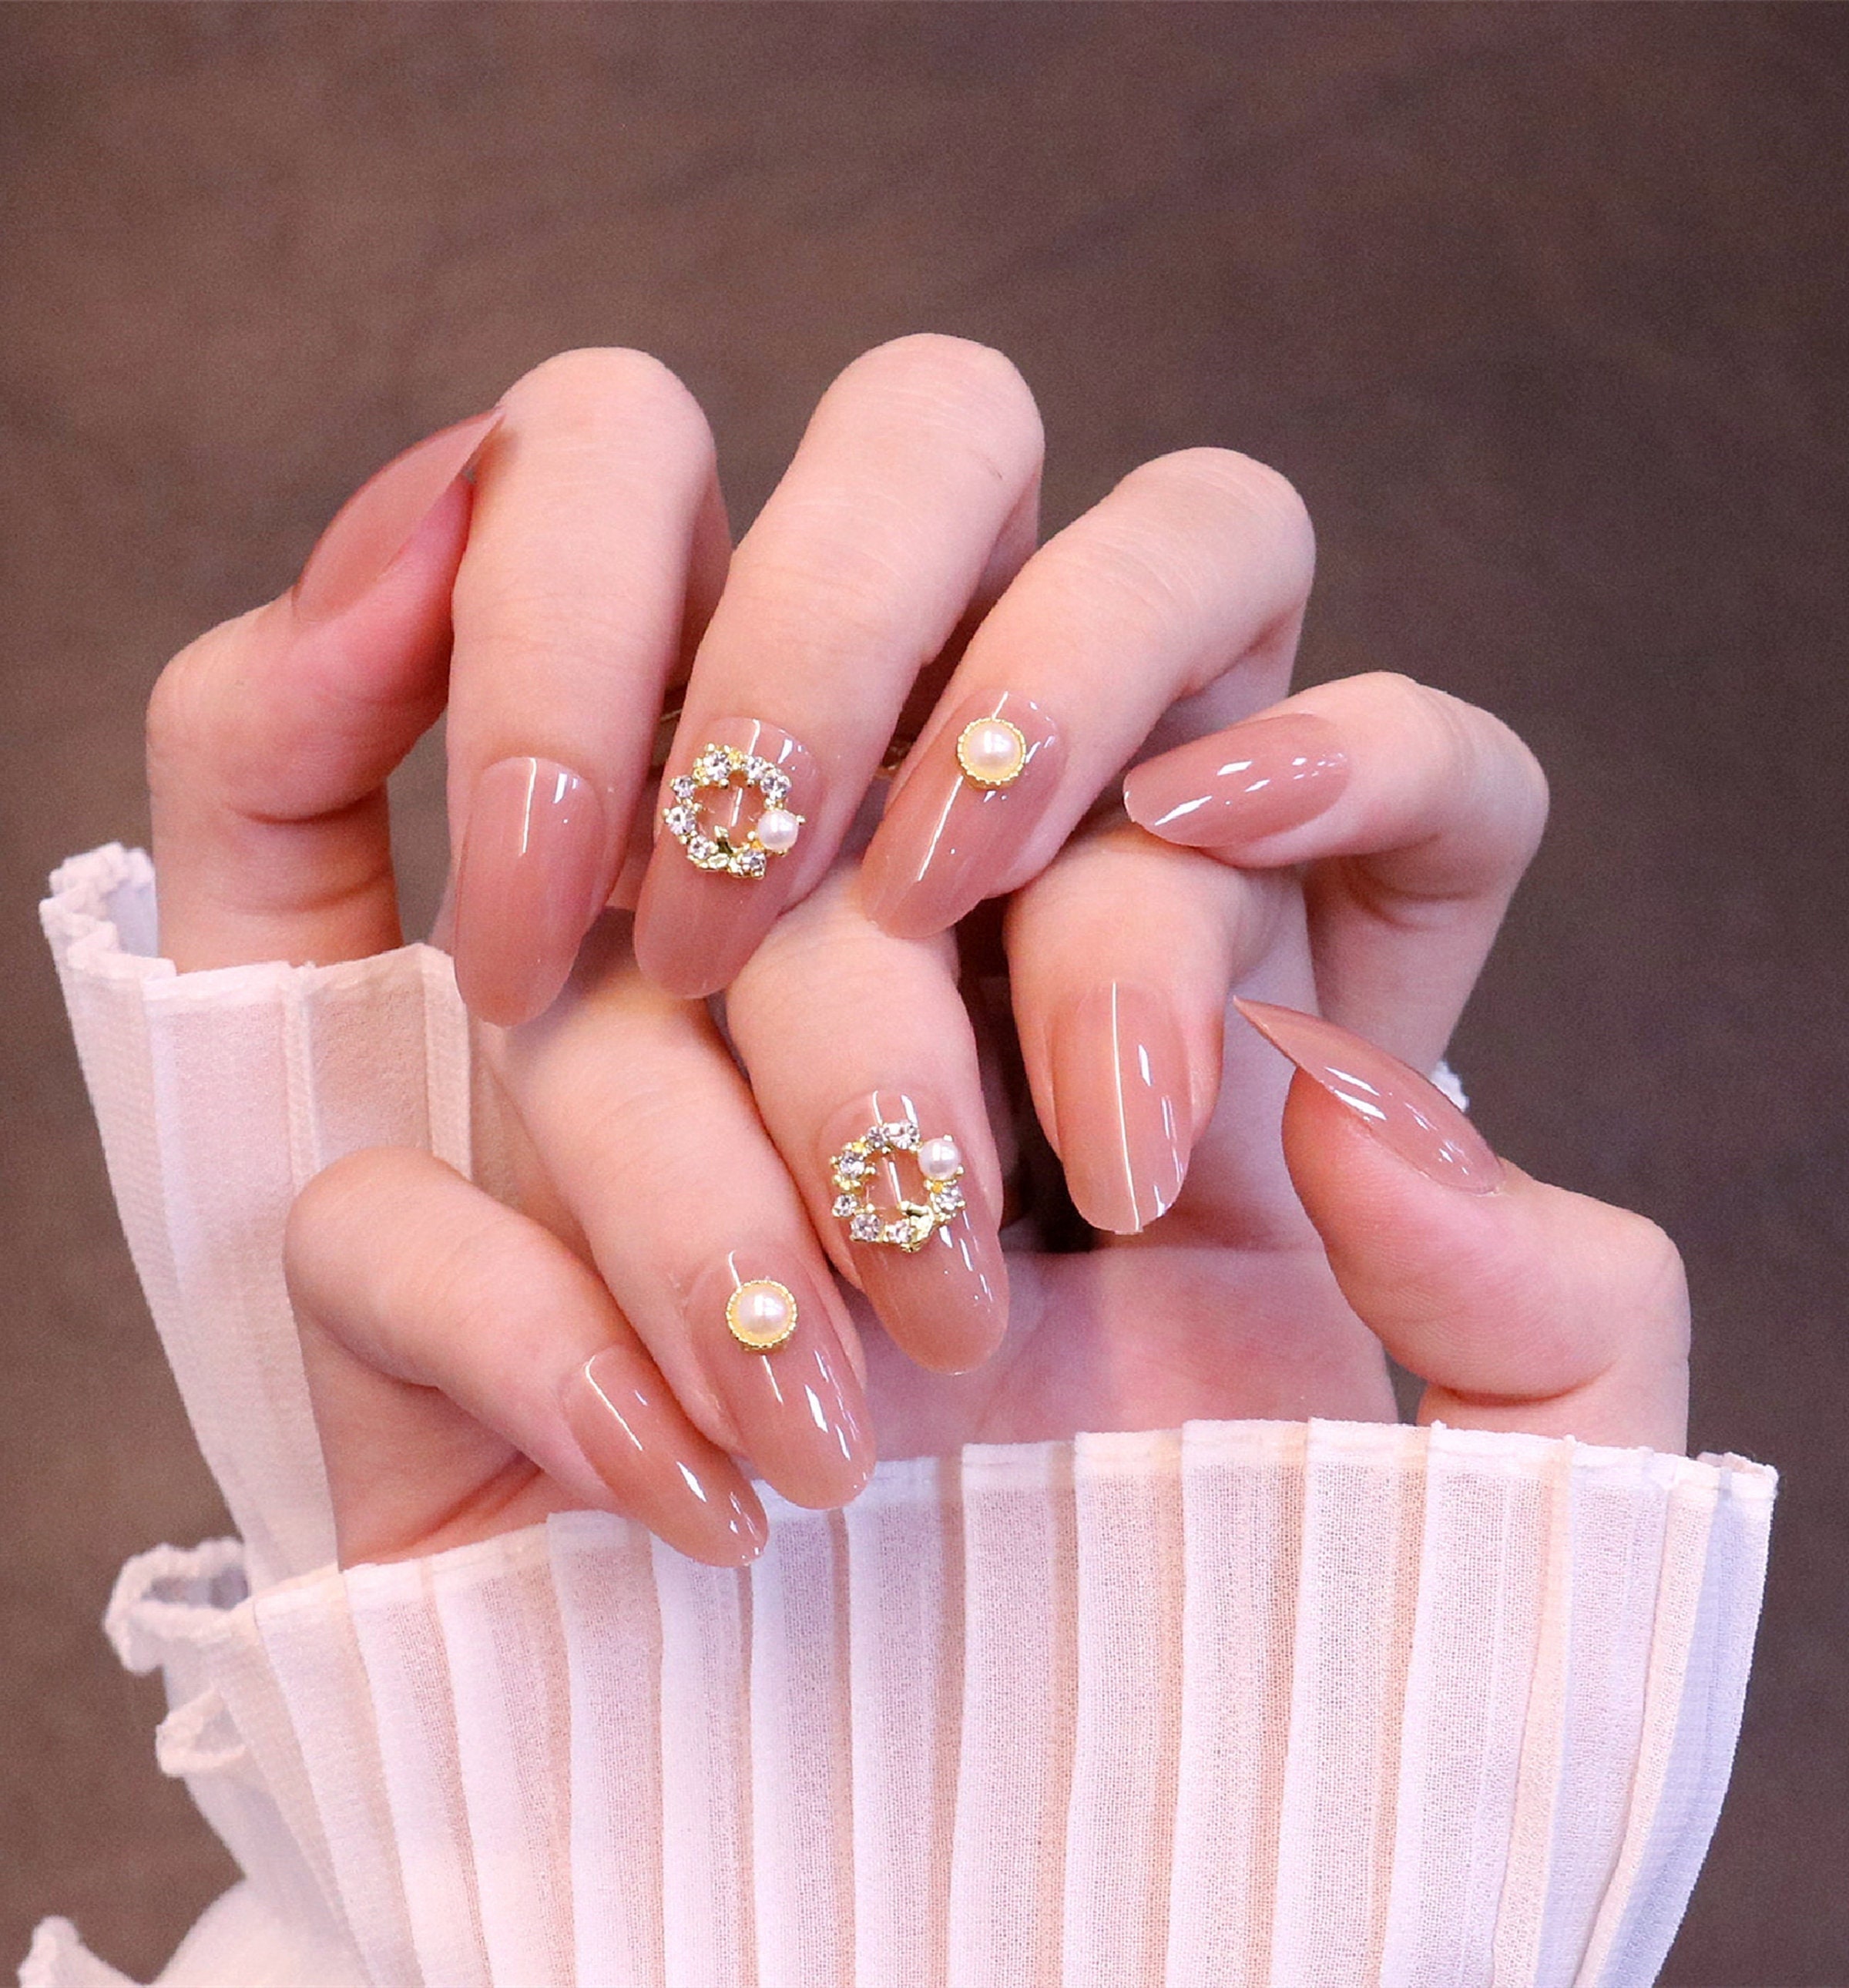 CUTE Multicolor Peach Marble With Pearls Bow Tie Press on Nails